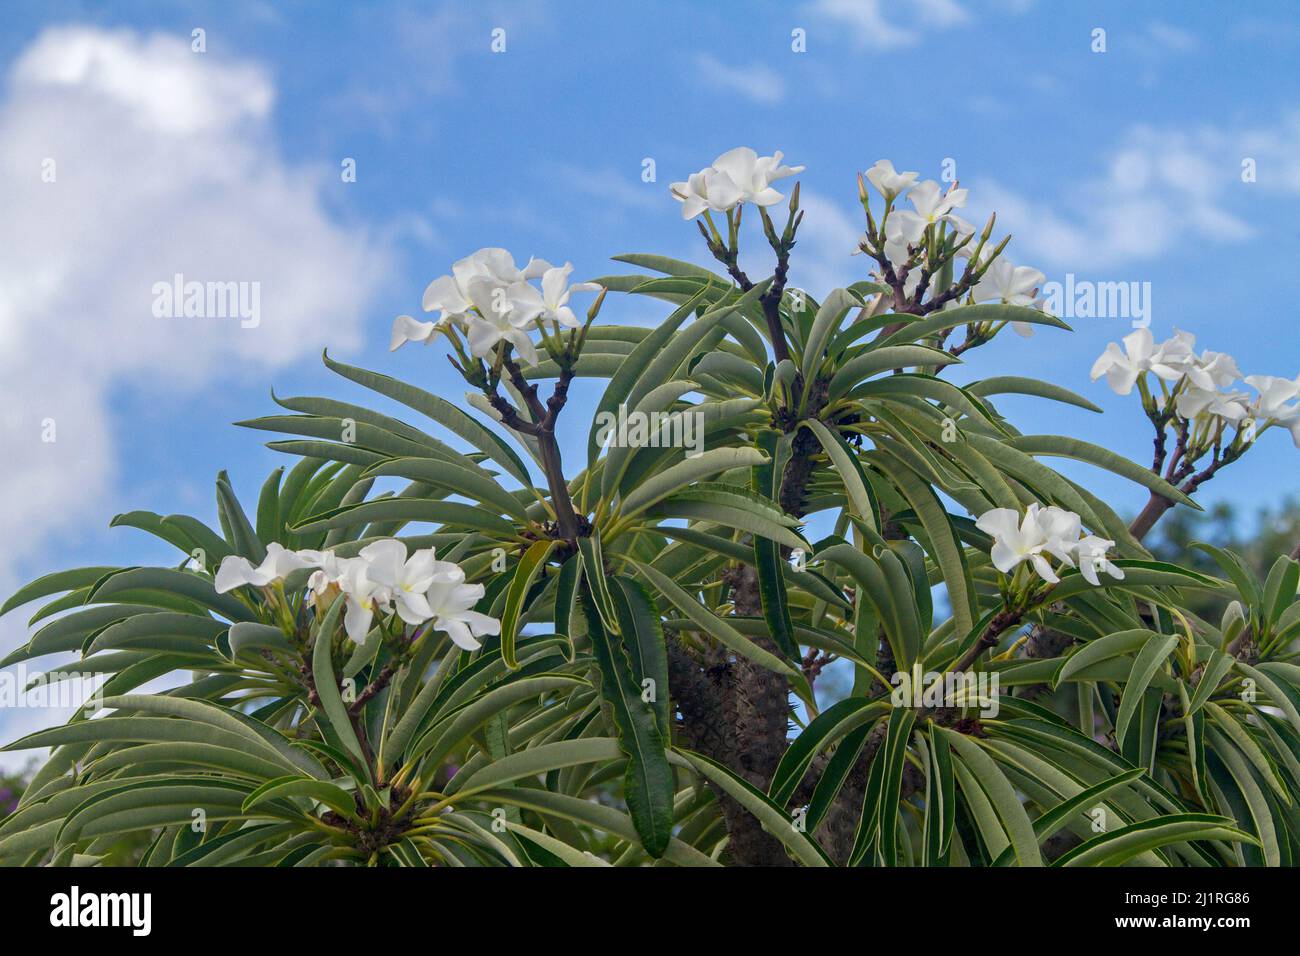 Cluster of large white flowers and foliage of Pachypodium lamerei, Madagascar palm, drought tolerant succulent plant, against background of blue sky Stock Photo